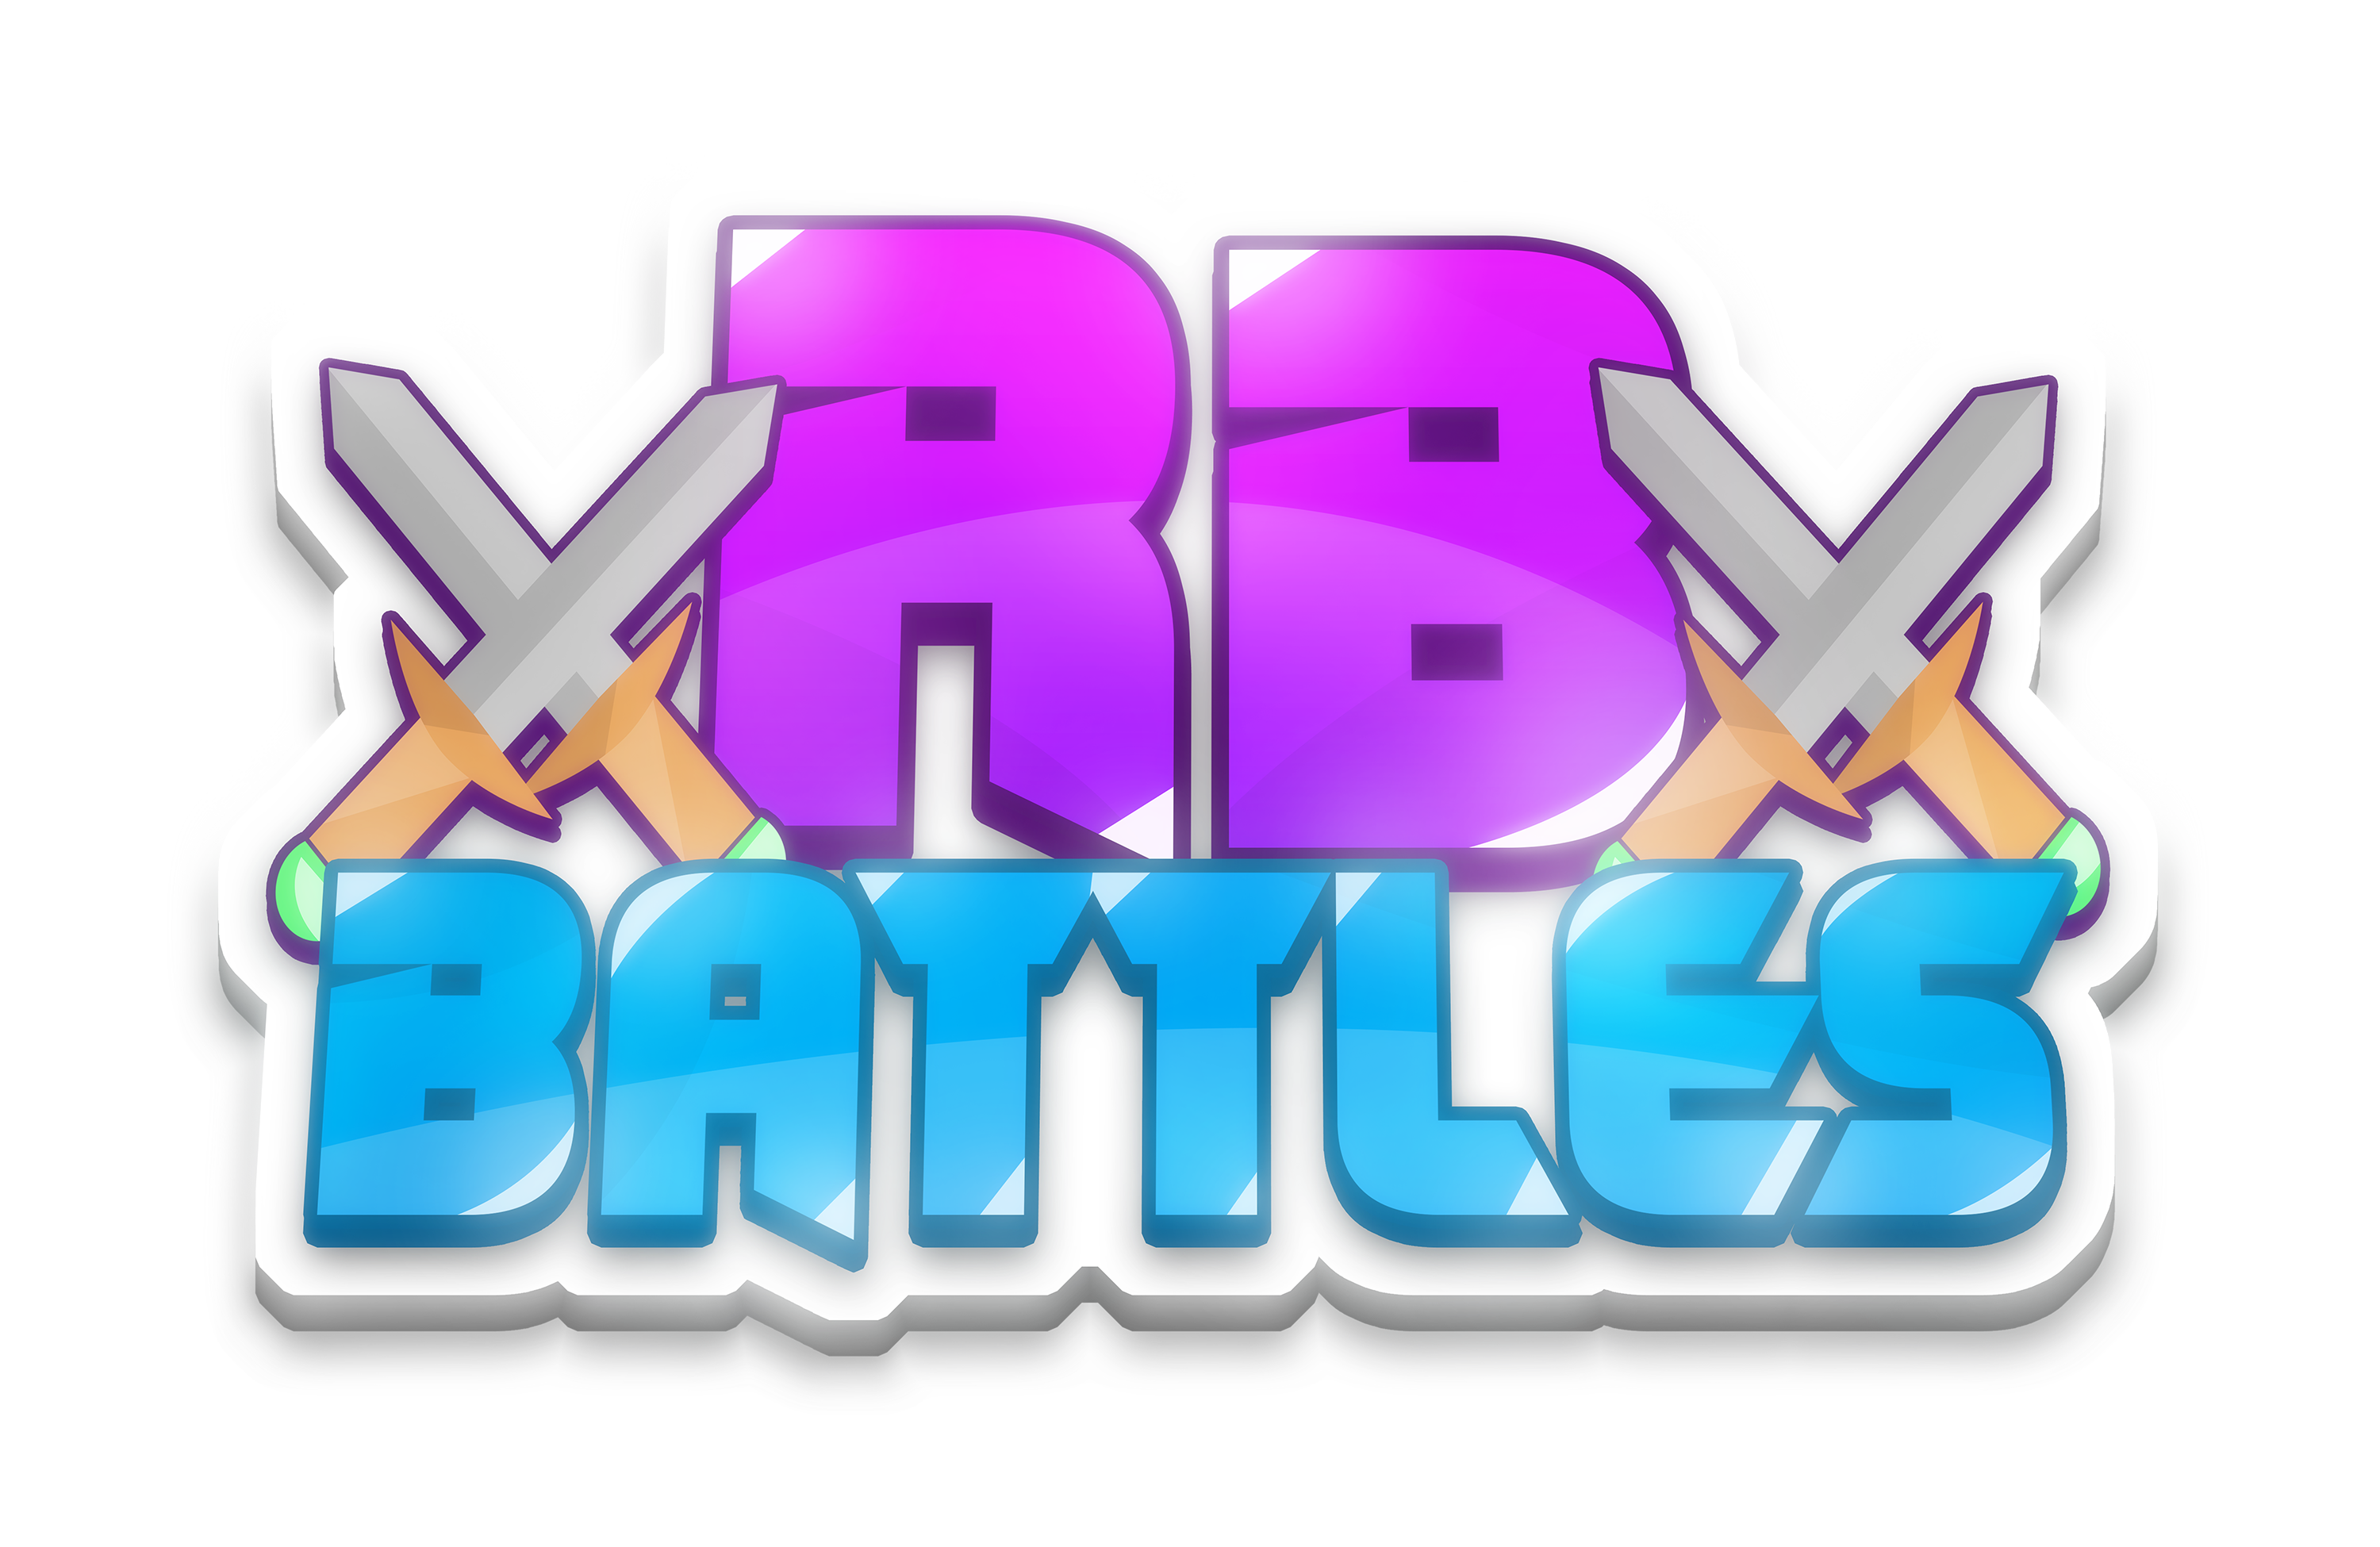 New Roblox Event 2019 Rb